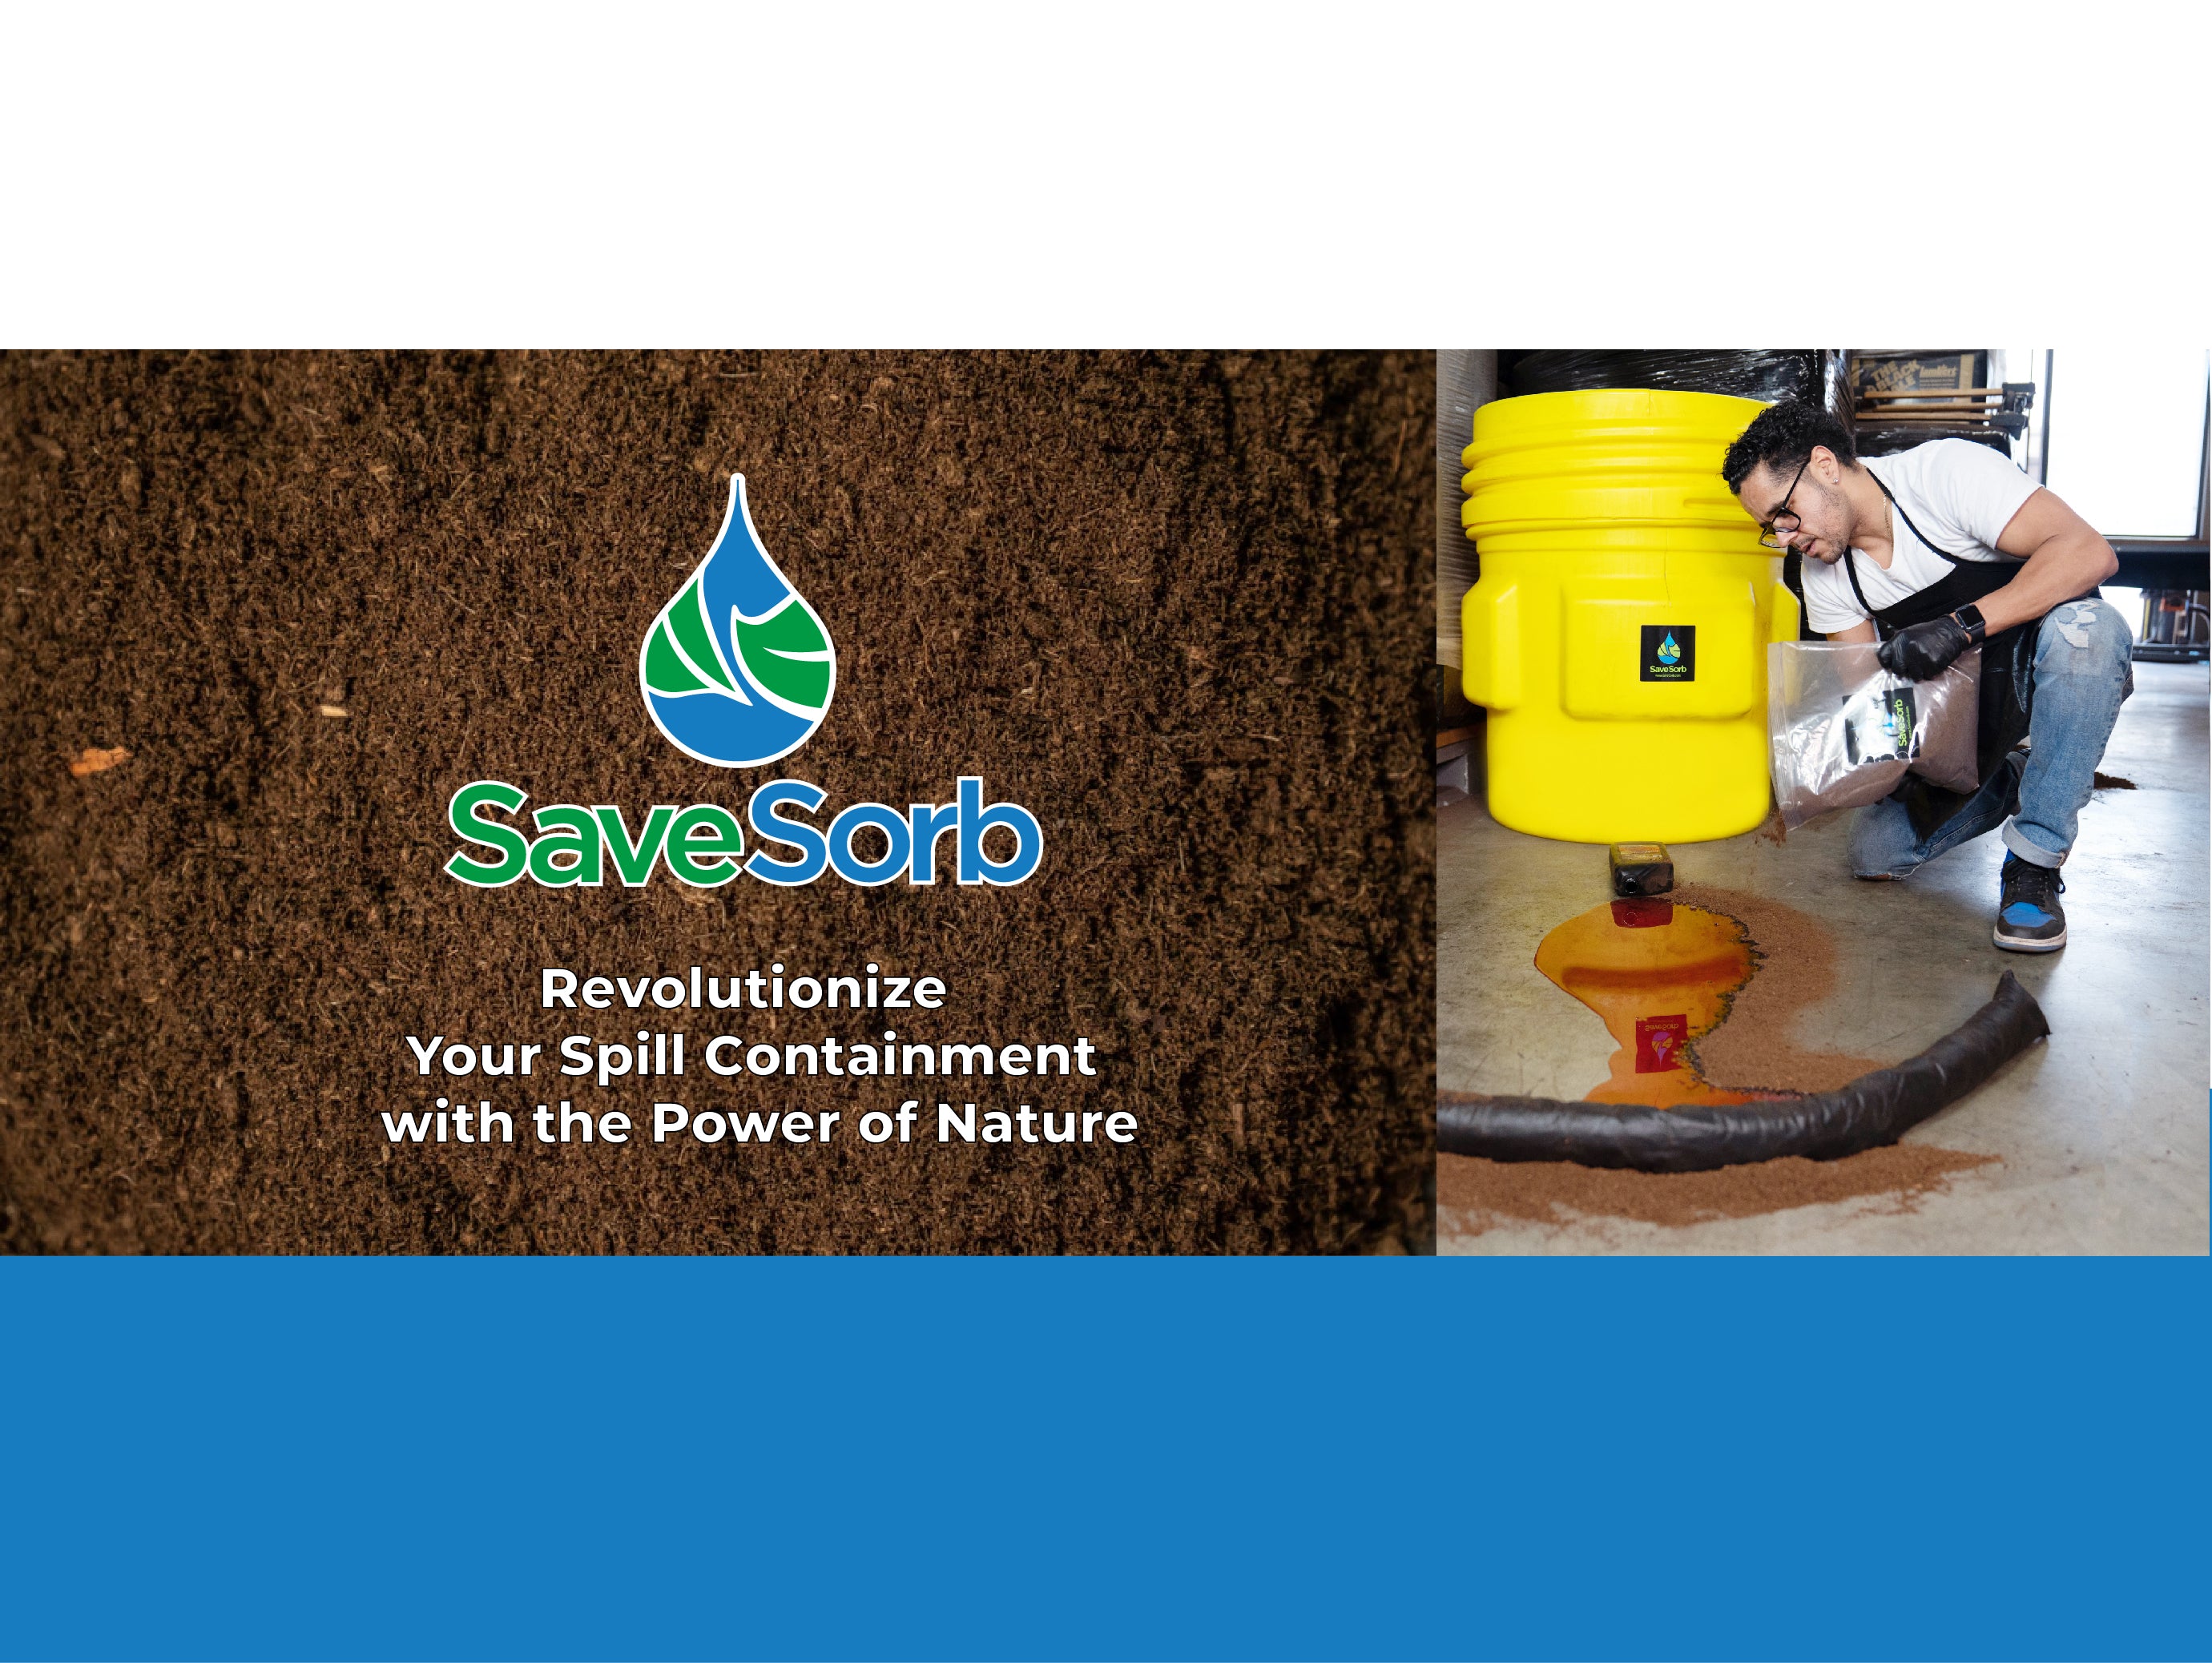 Understanding the importance of spill containment training in the workplace